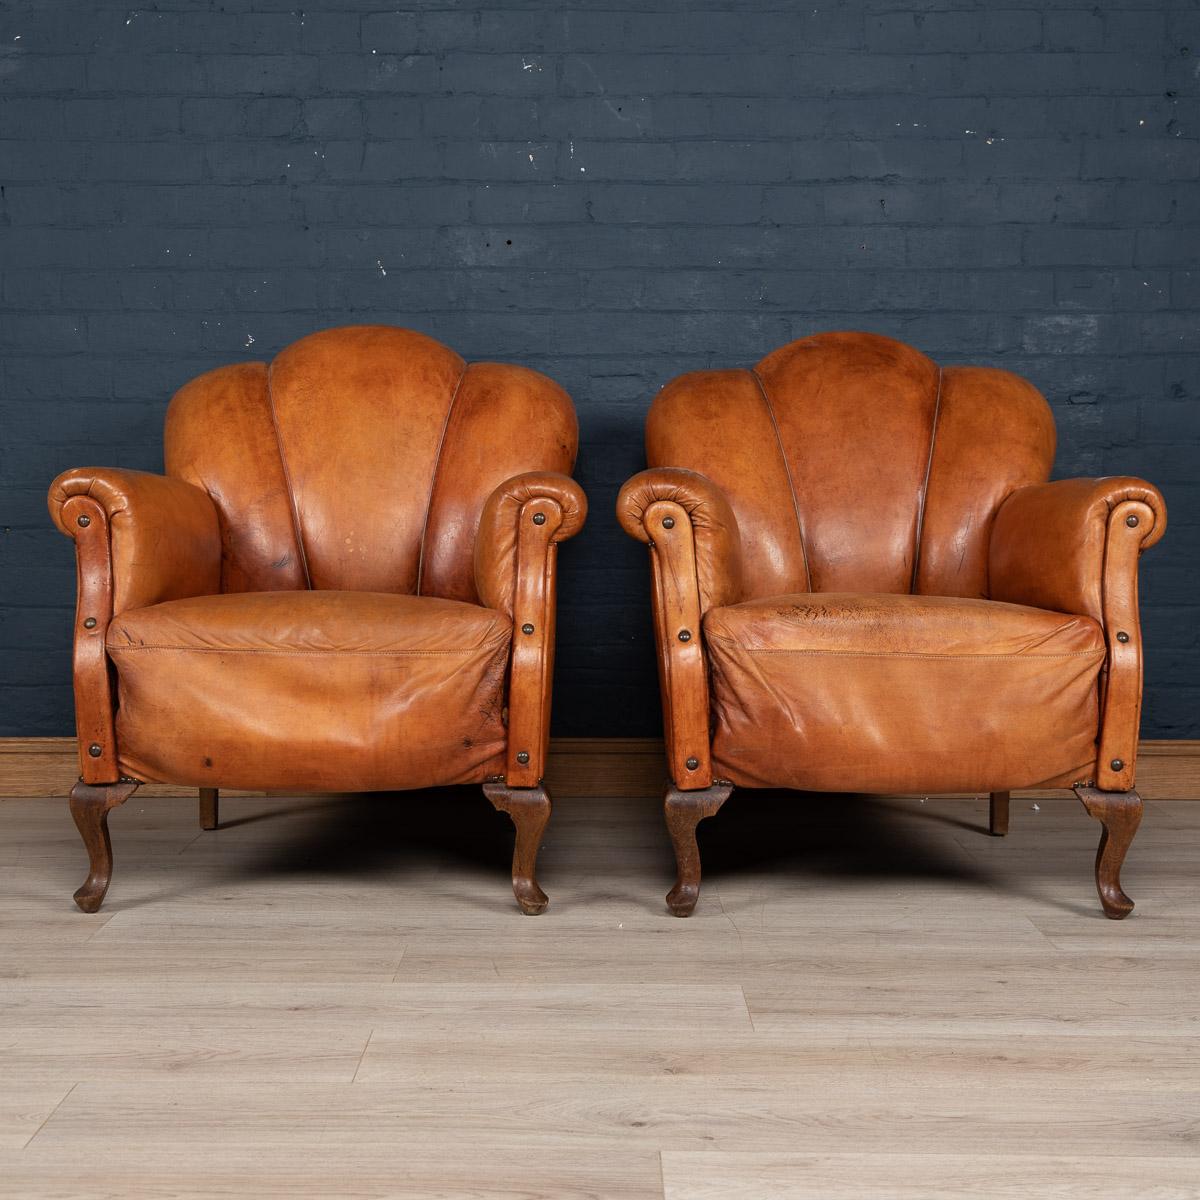 A wonderful pair of leather scallop-back armchairs. Dating to the middle to late part of the 20th century these chairs were realised by the finest Dutch craftsmen, the solid wood frame upholstered in superb quality leather which over the years have